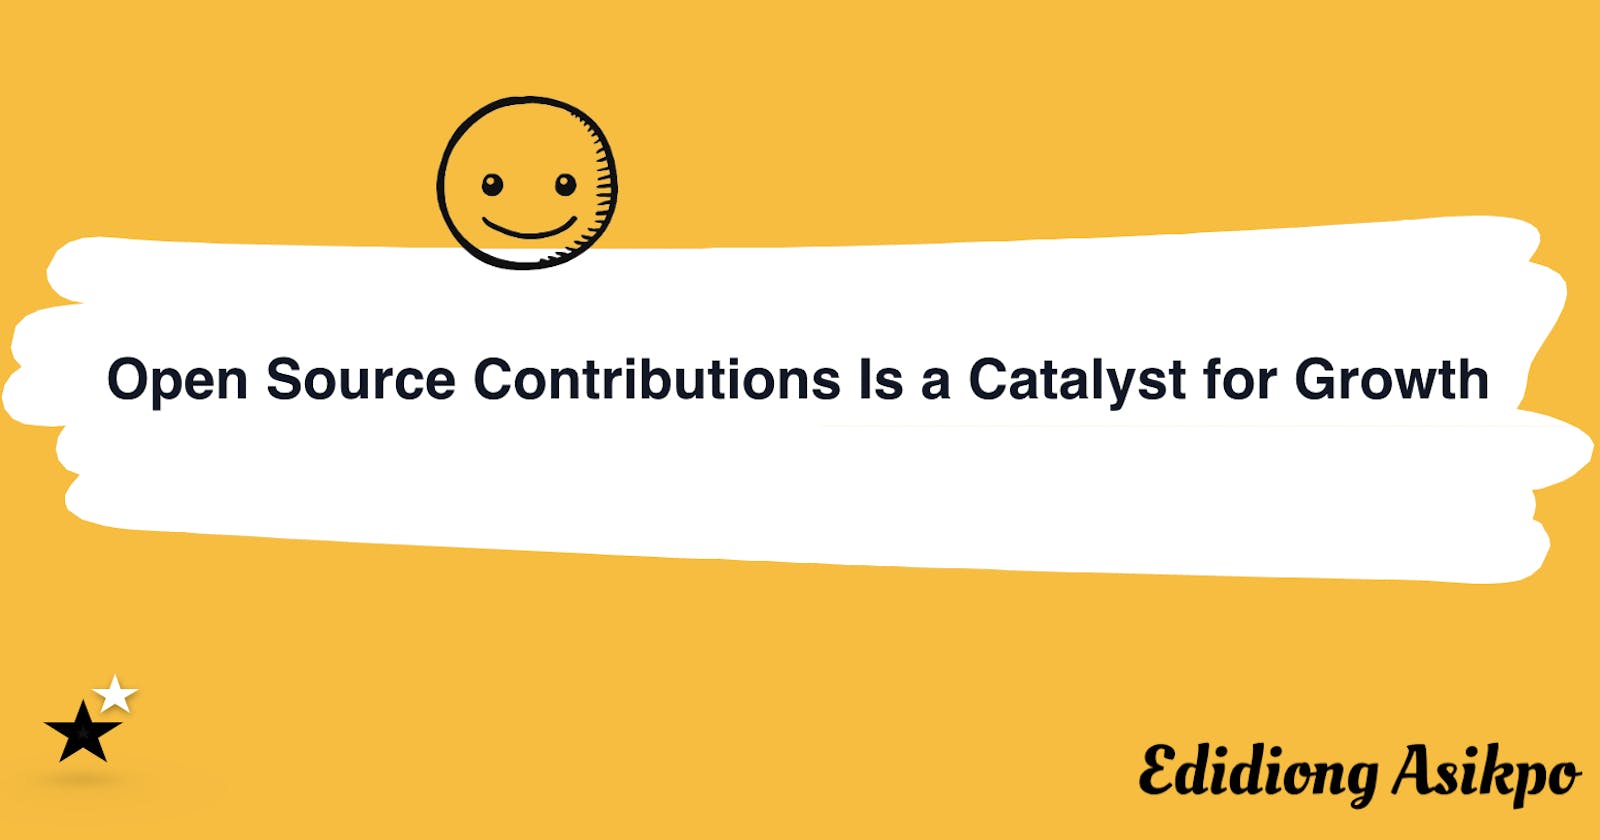 Open Source contributions: A catalyst for growth.